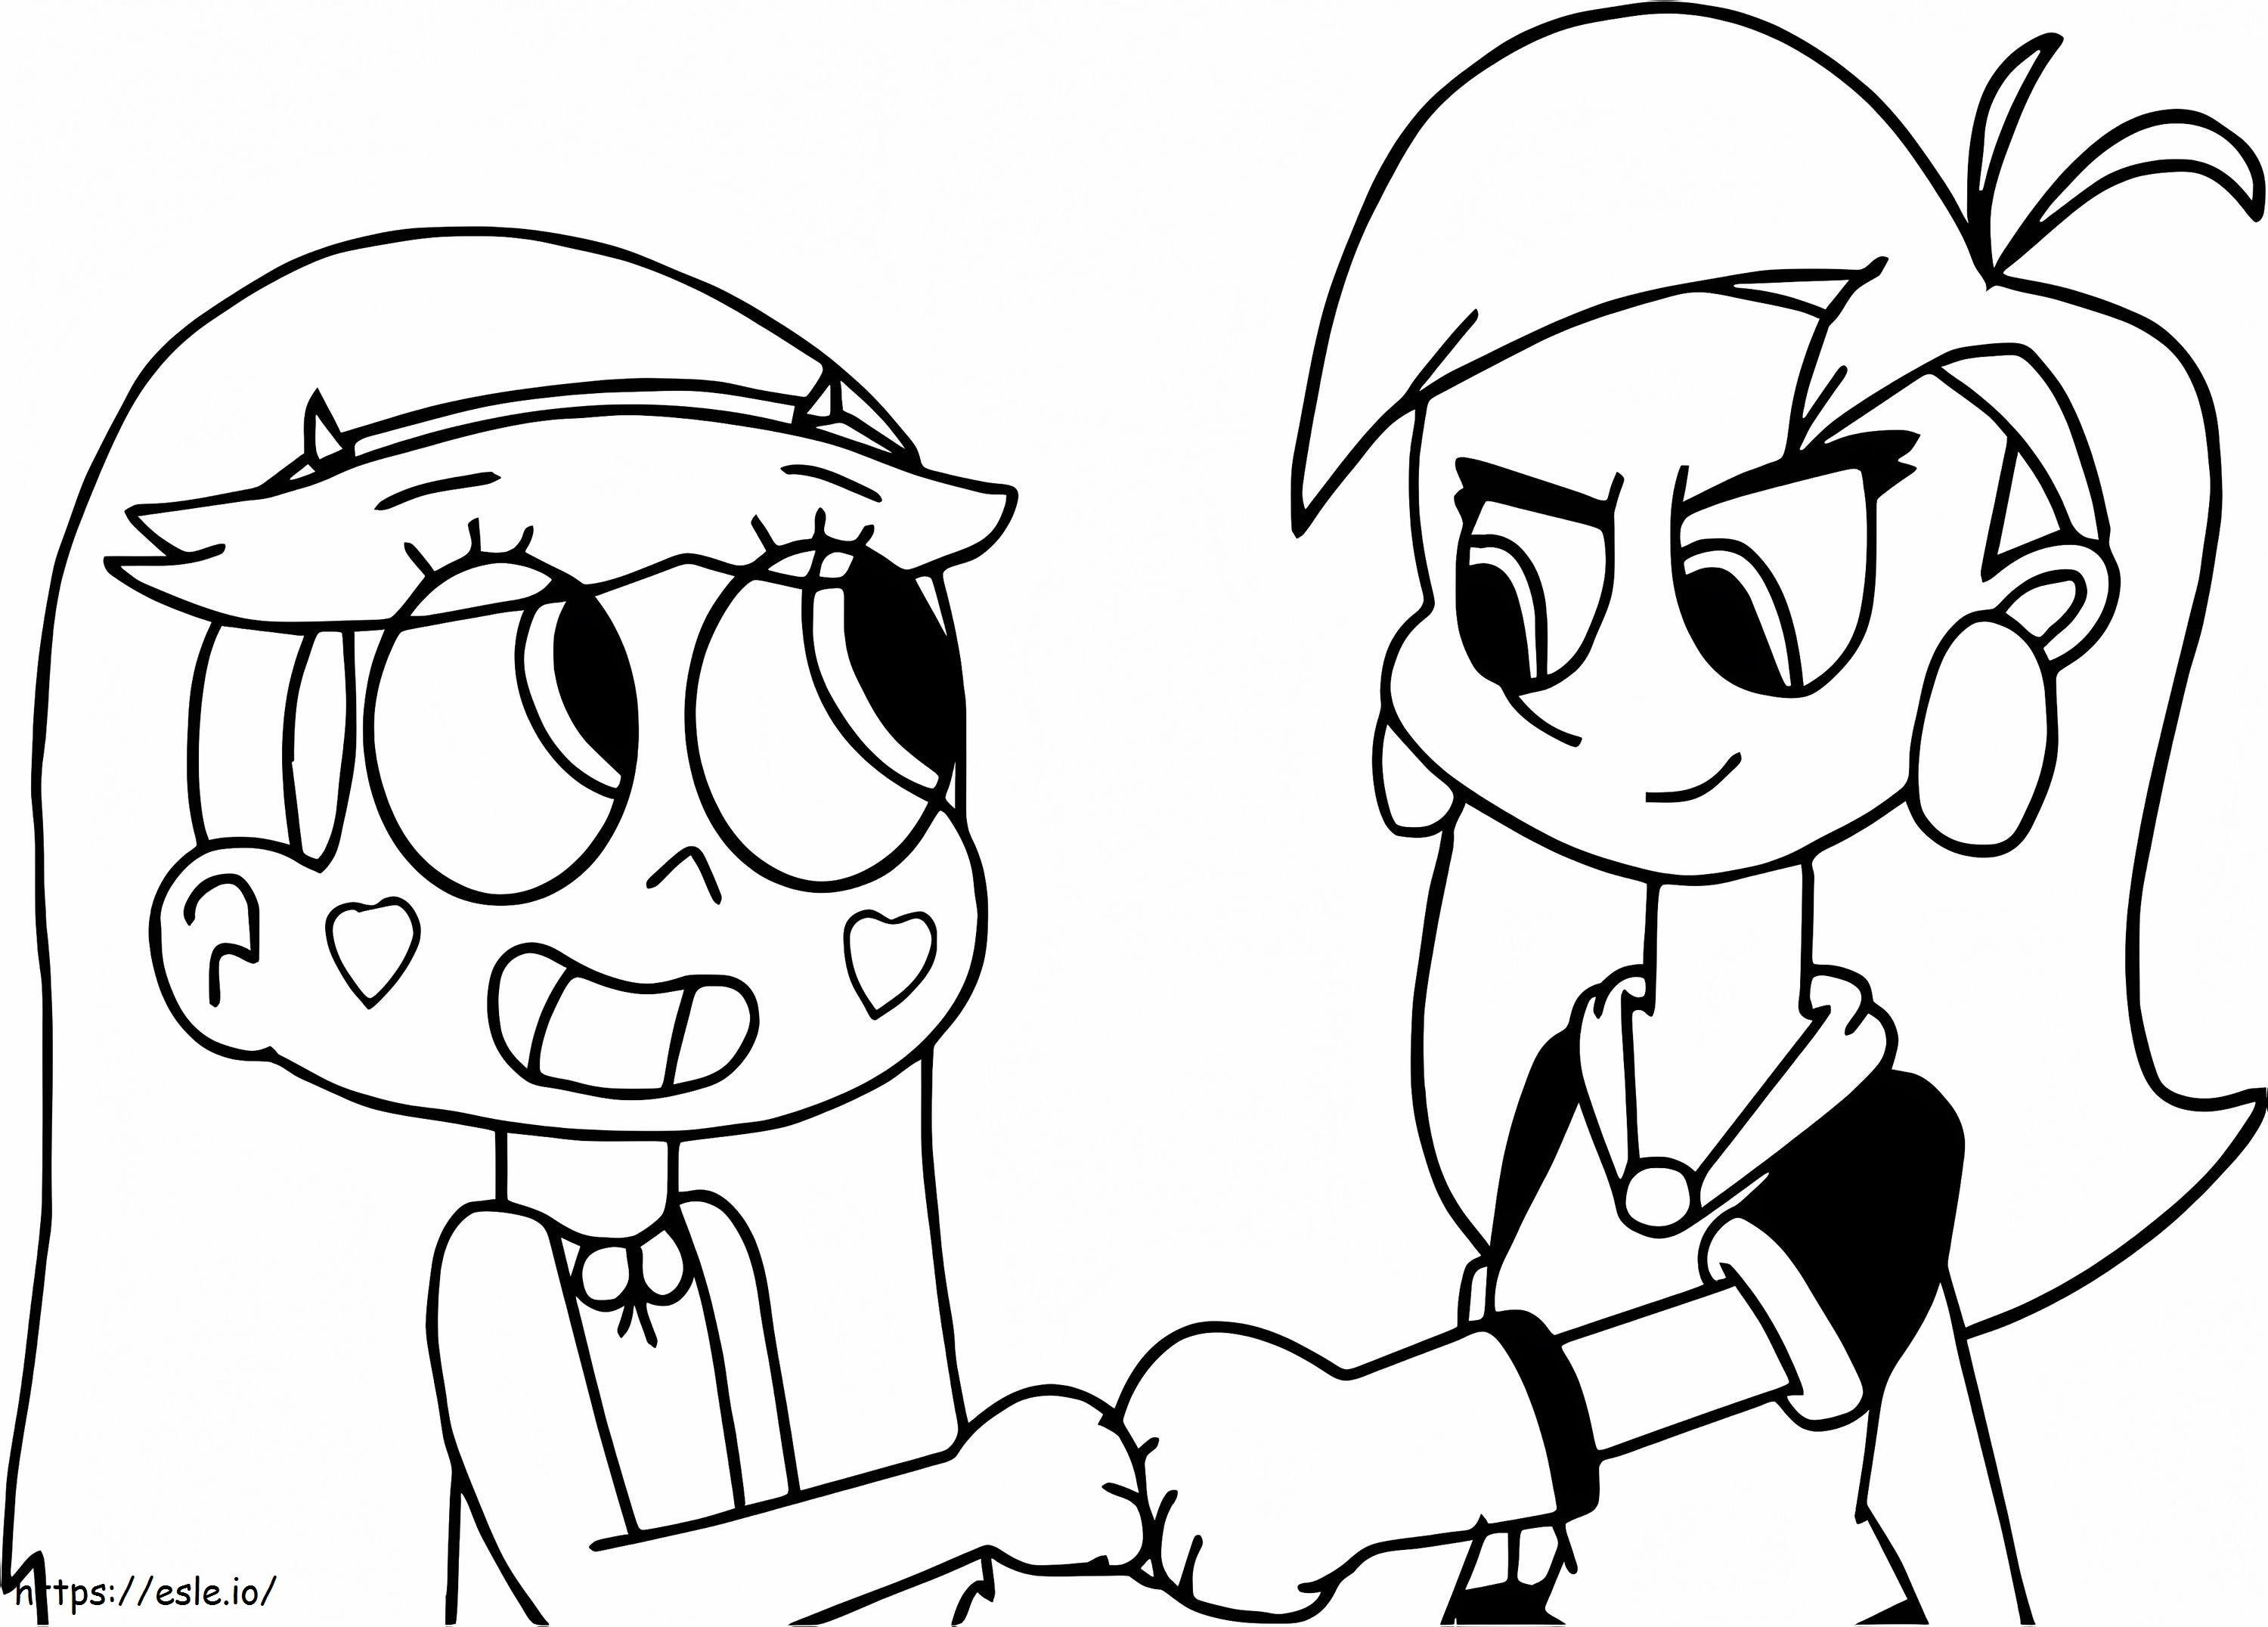 Star Vs. The Forces Of Evil 10 coloring page